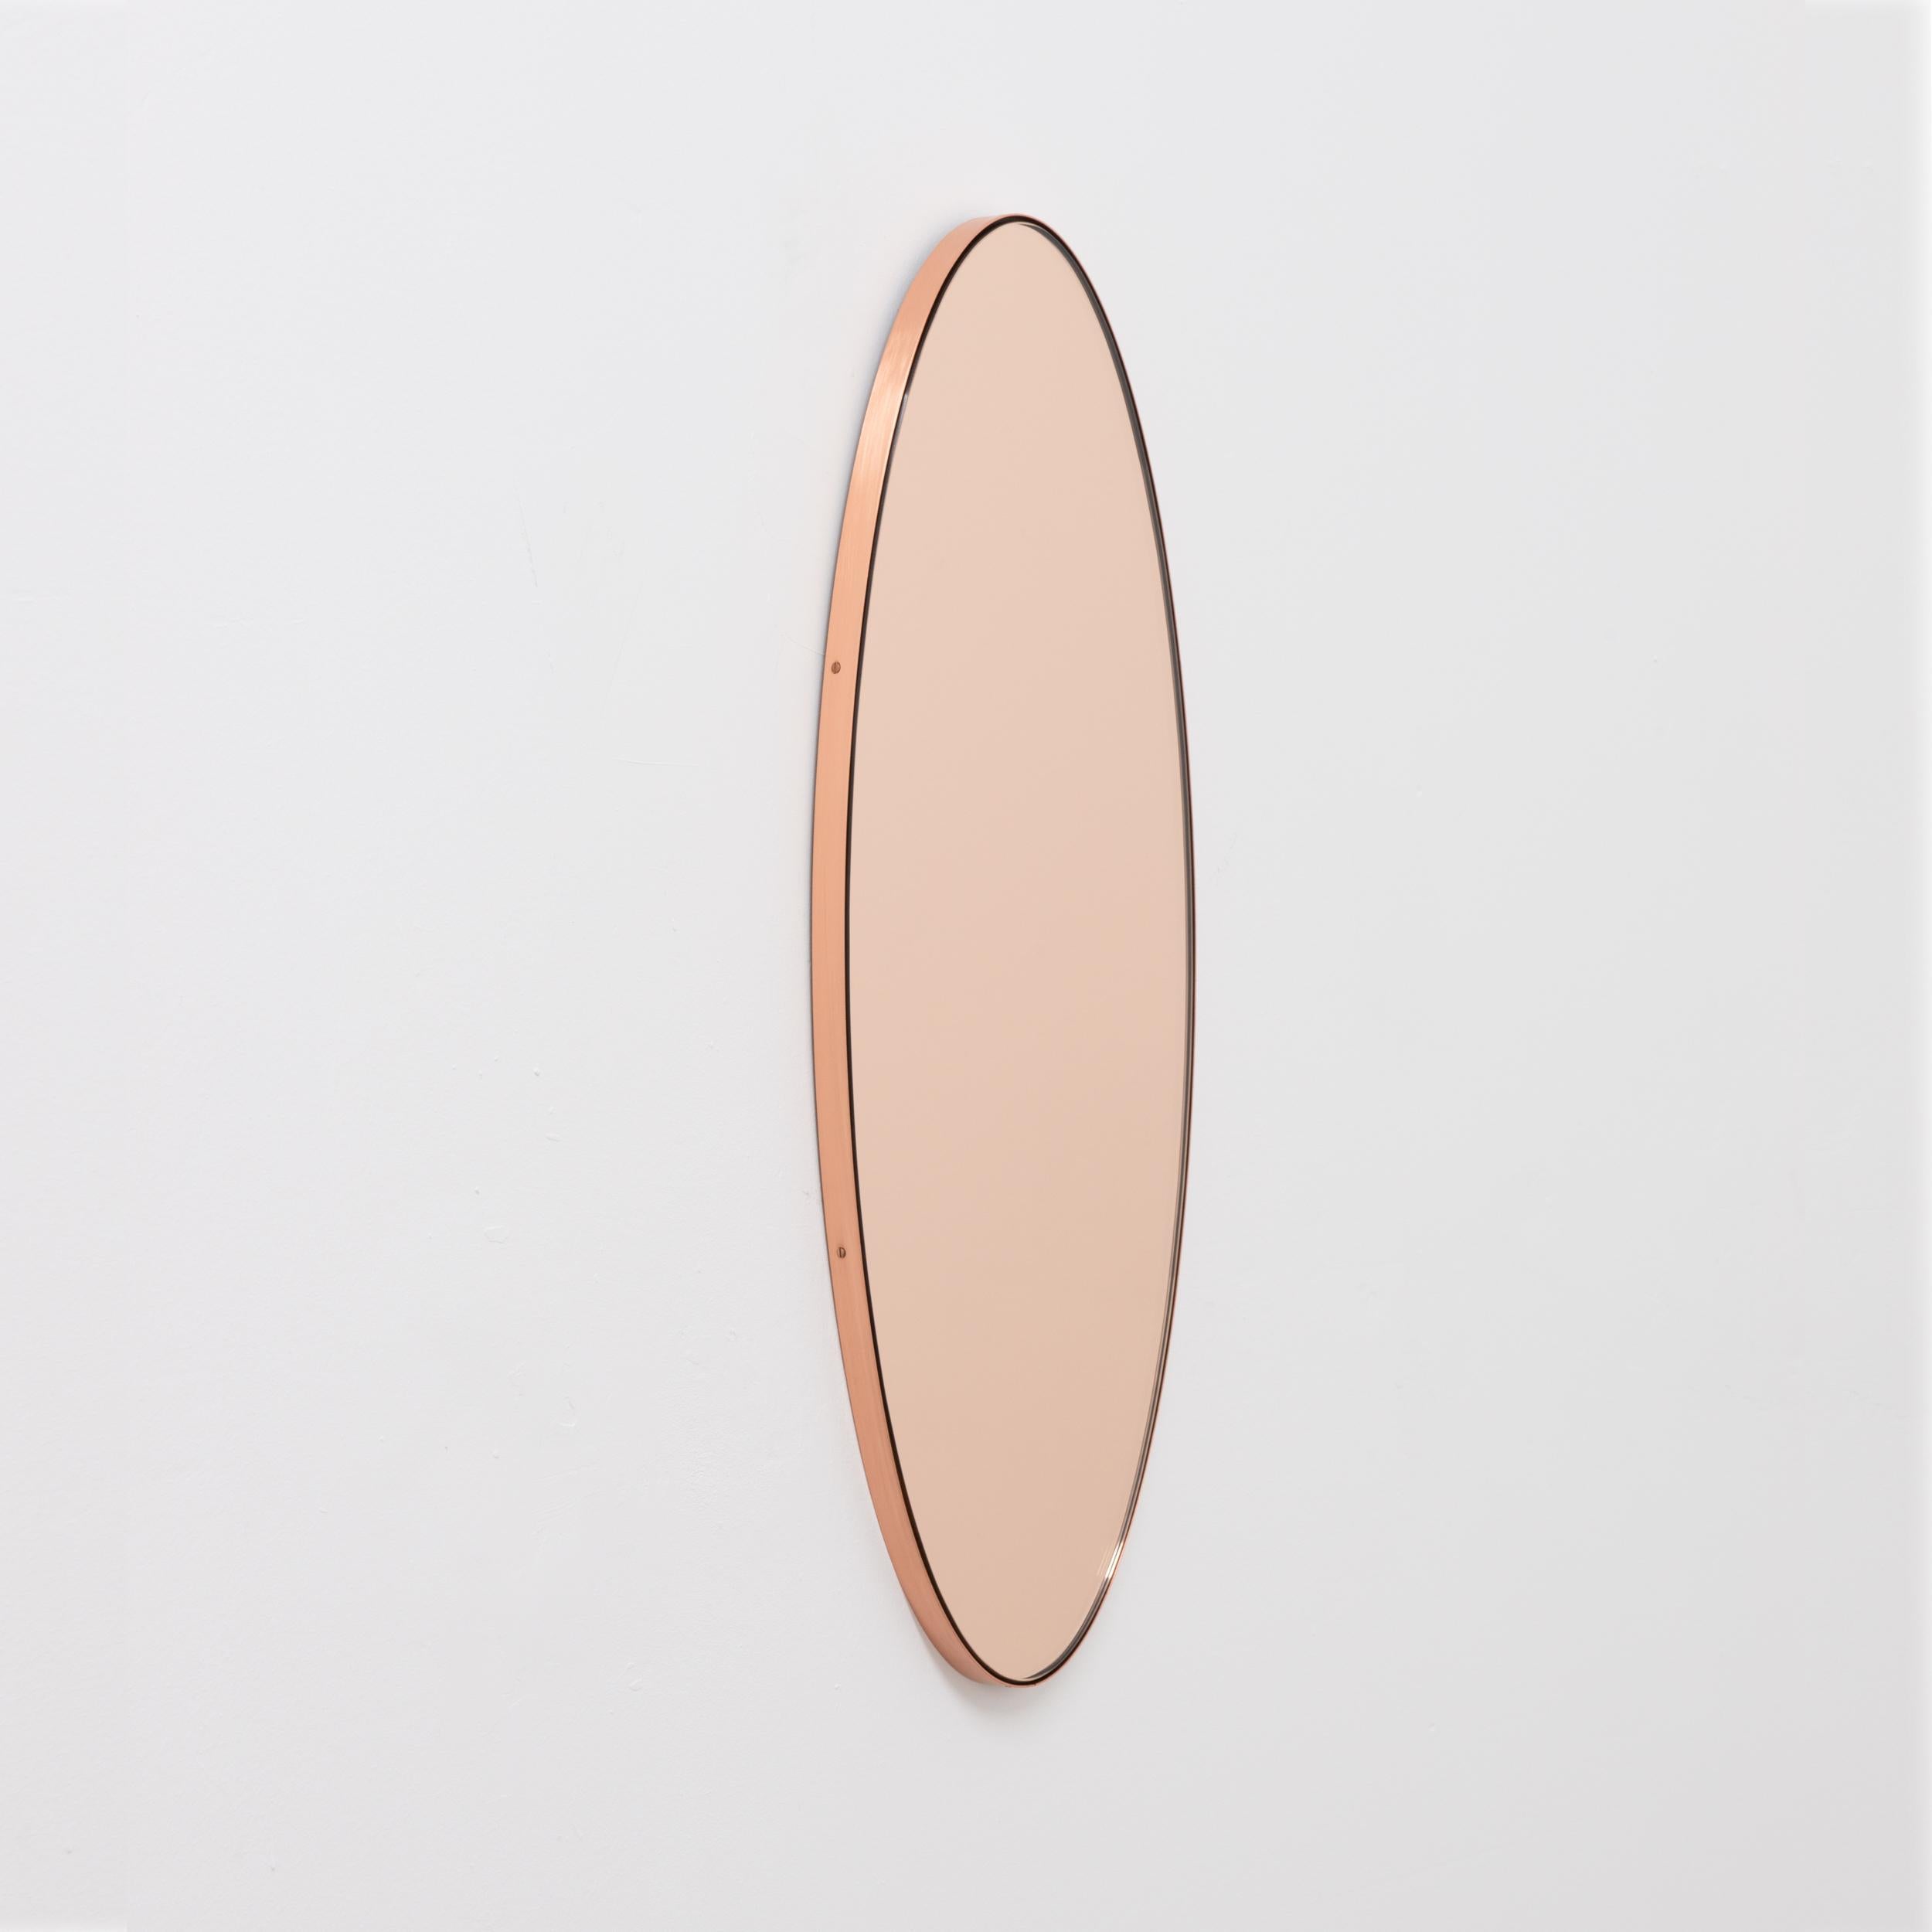 Contemporary oval shaped rose gold/peach mirror with an elegant copper frame. Designed and handcrafted in London, UK.

Medium, large and extra-large (37cm x 56cm, 46cm x 71cm and 48cm x 97cm) mirrors are fitted with an ingenious French cleat (split